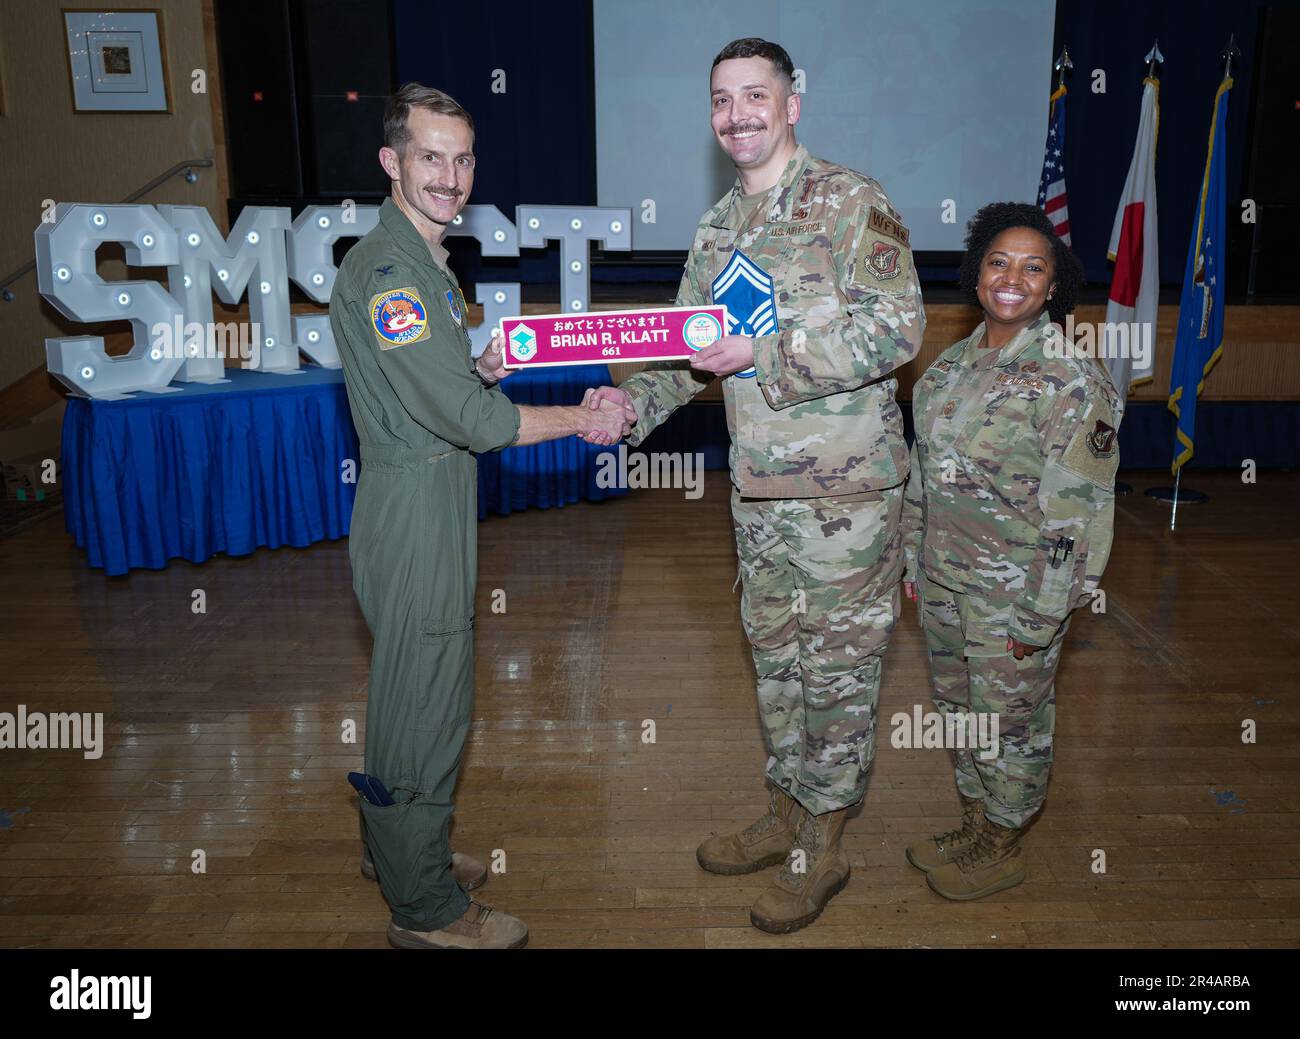 U.S. Air Force Col. Michael P. Richard, 35th Fighter Wing commander, and Chief Master Sgt. Cheronica Blandburg, 35th FW command chief, pose for a photo with Master Sgt. Brian Klatt, 35th Maintenance Squadron, during an E-8 release party at Misawa Air Base, Japan, March 23, 2023. Air Force officials selected 1,629 master sergeants for promotion to senior master sergeant, out of 16,031 eligible, for a selection rate of 10.16 percent in the 23 E8 promotion cycle. Stock Photo